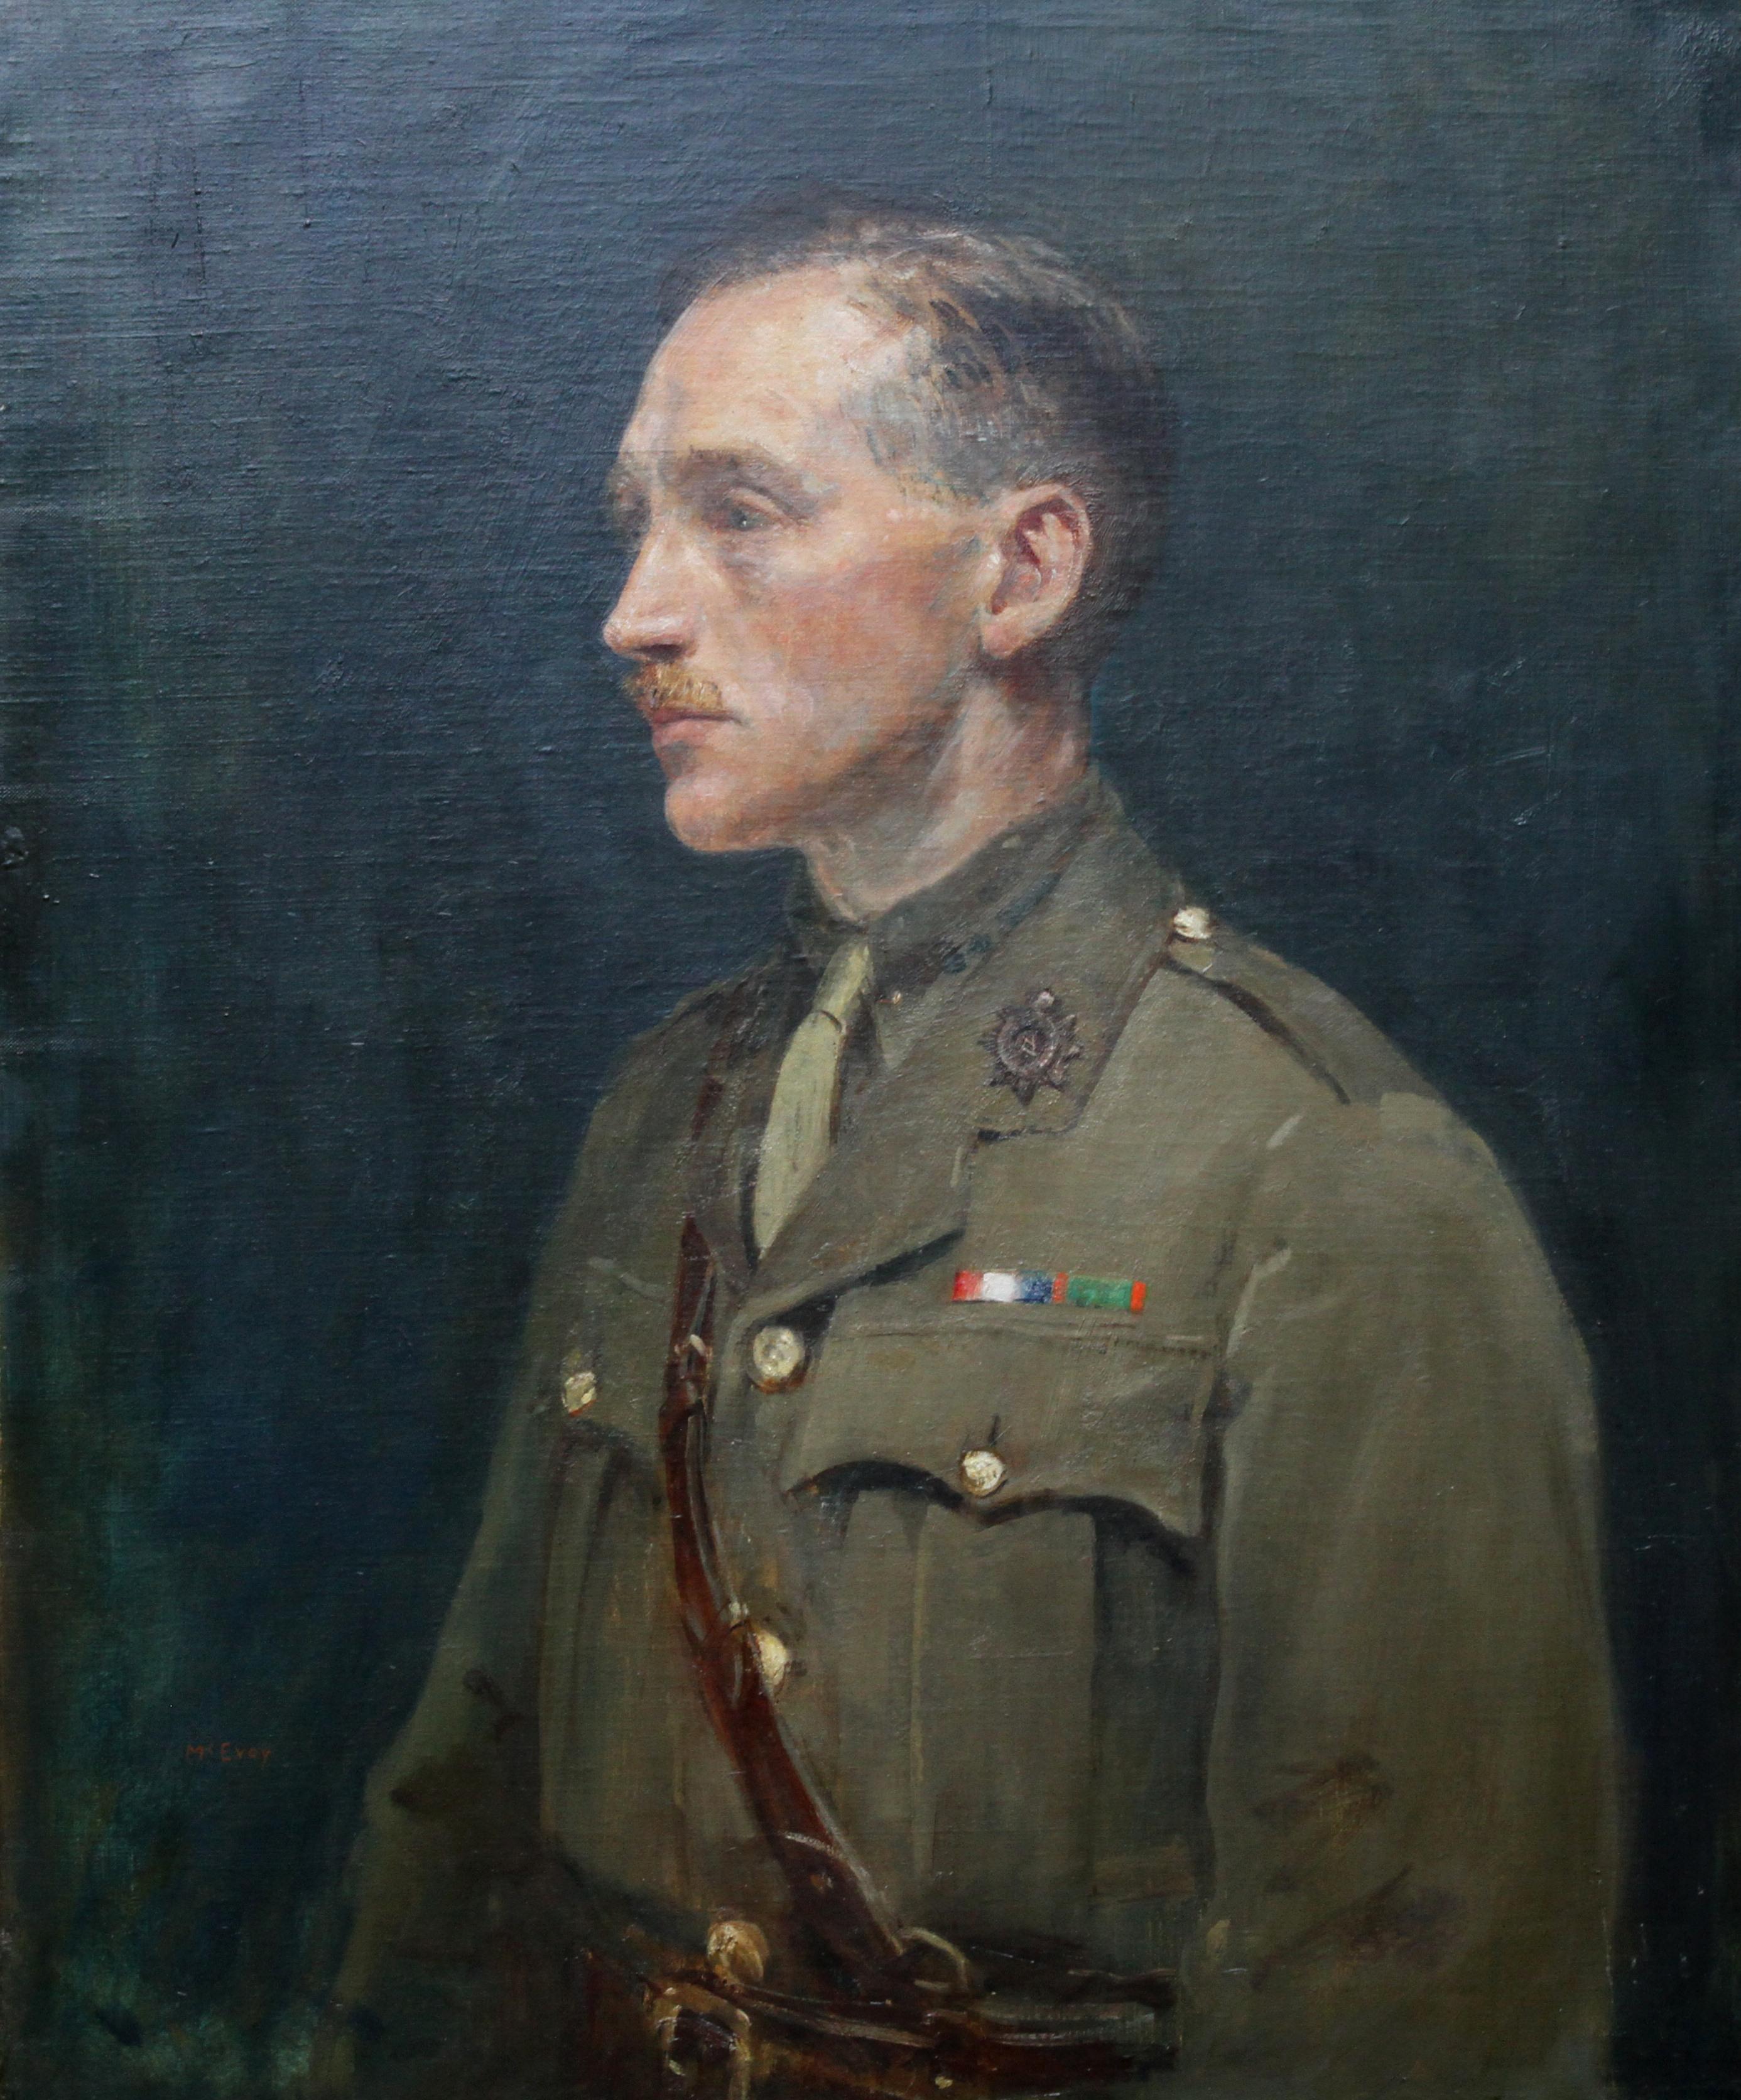 Portrait of Dr Anderson - British Slade School oil painting military uniform WWI - Painting by Arthur Ambrose McEvoy